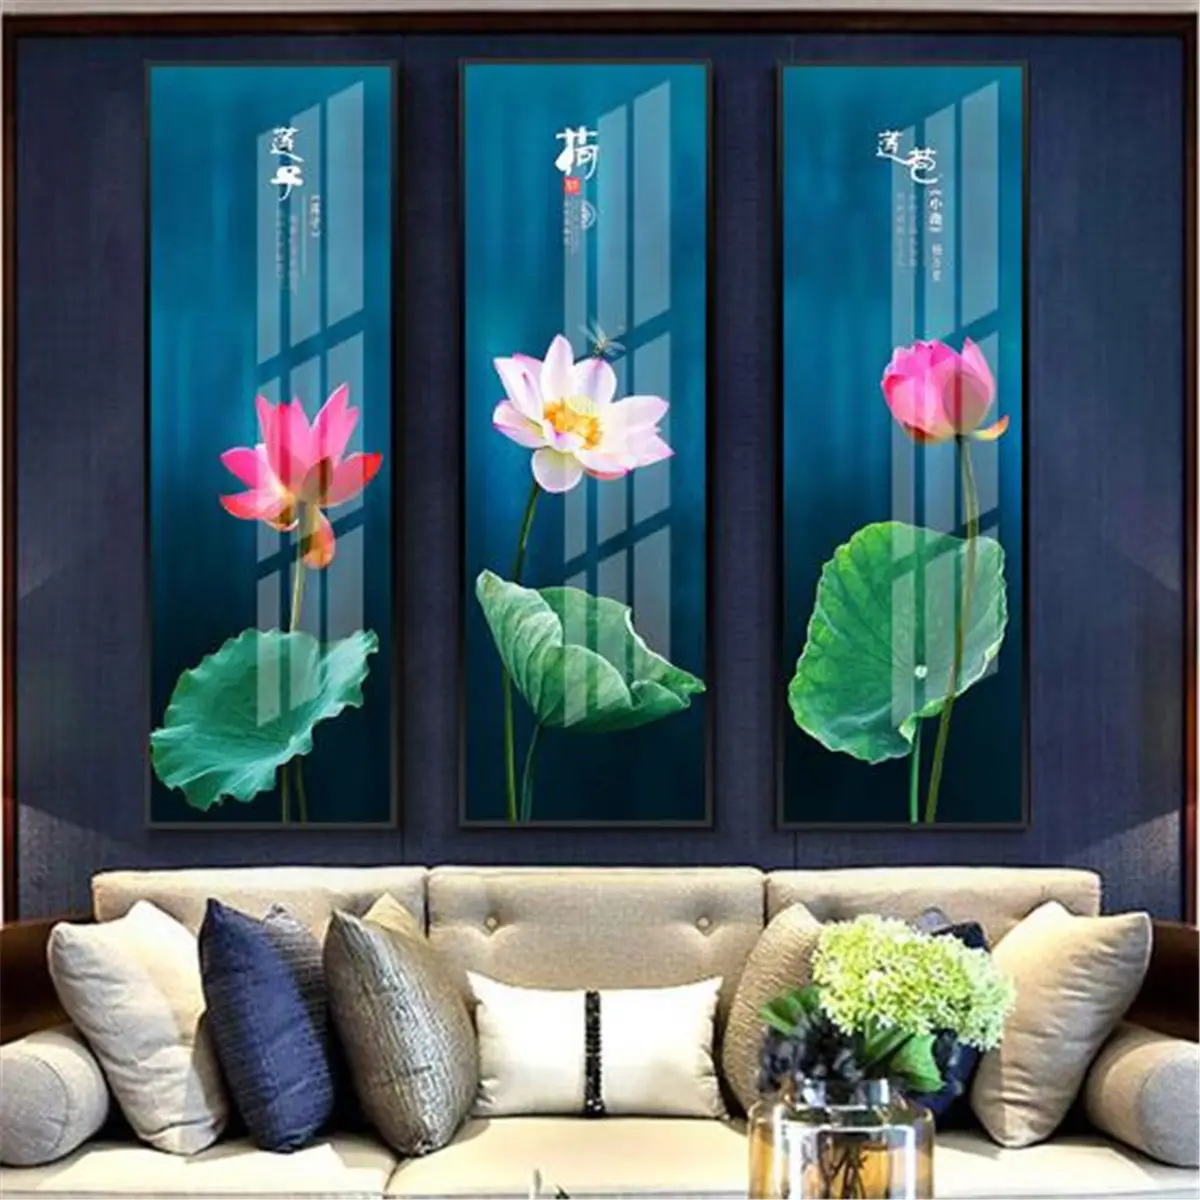 Lotus Flower Poetry Landscape Canvas Poster Picture Wall Home Art Decor Unframed